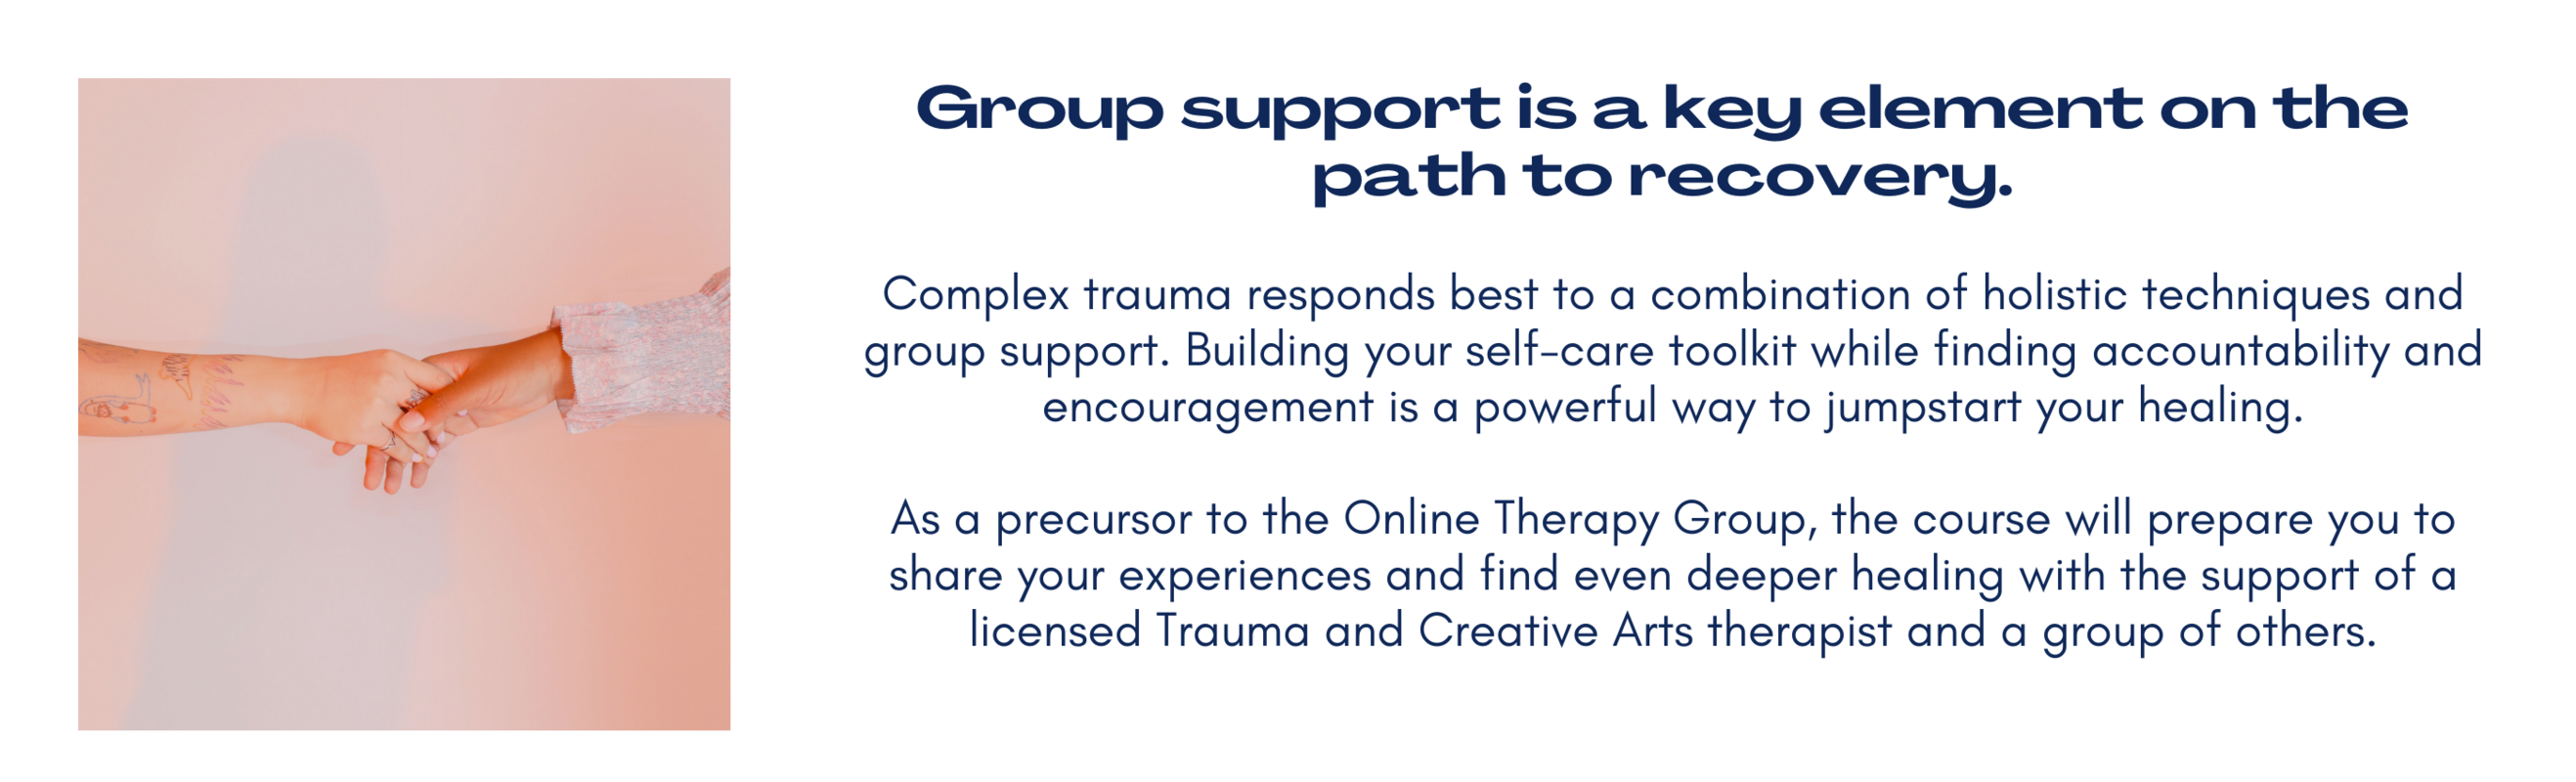 Group support is a key element on the path to recovery.